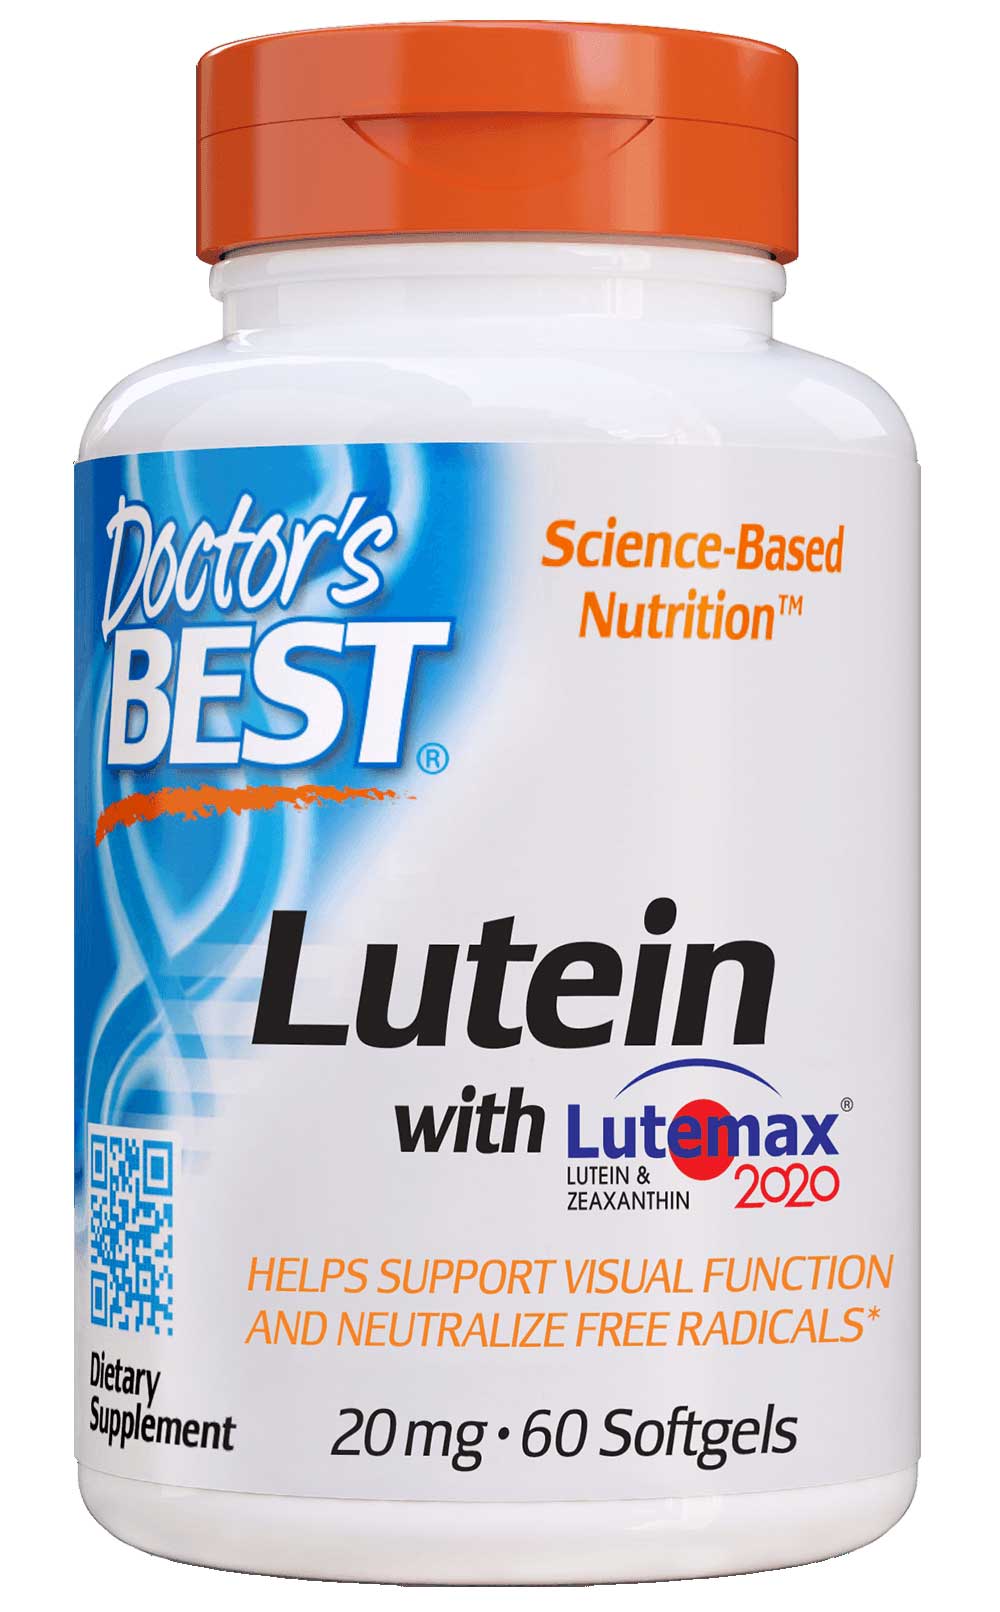 Doctor's Best Lutein with Lutemax